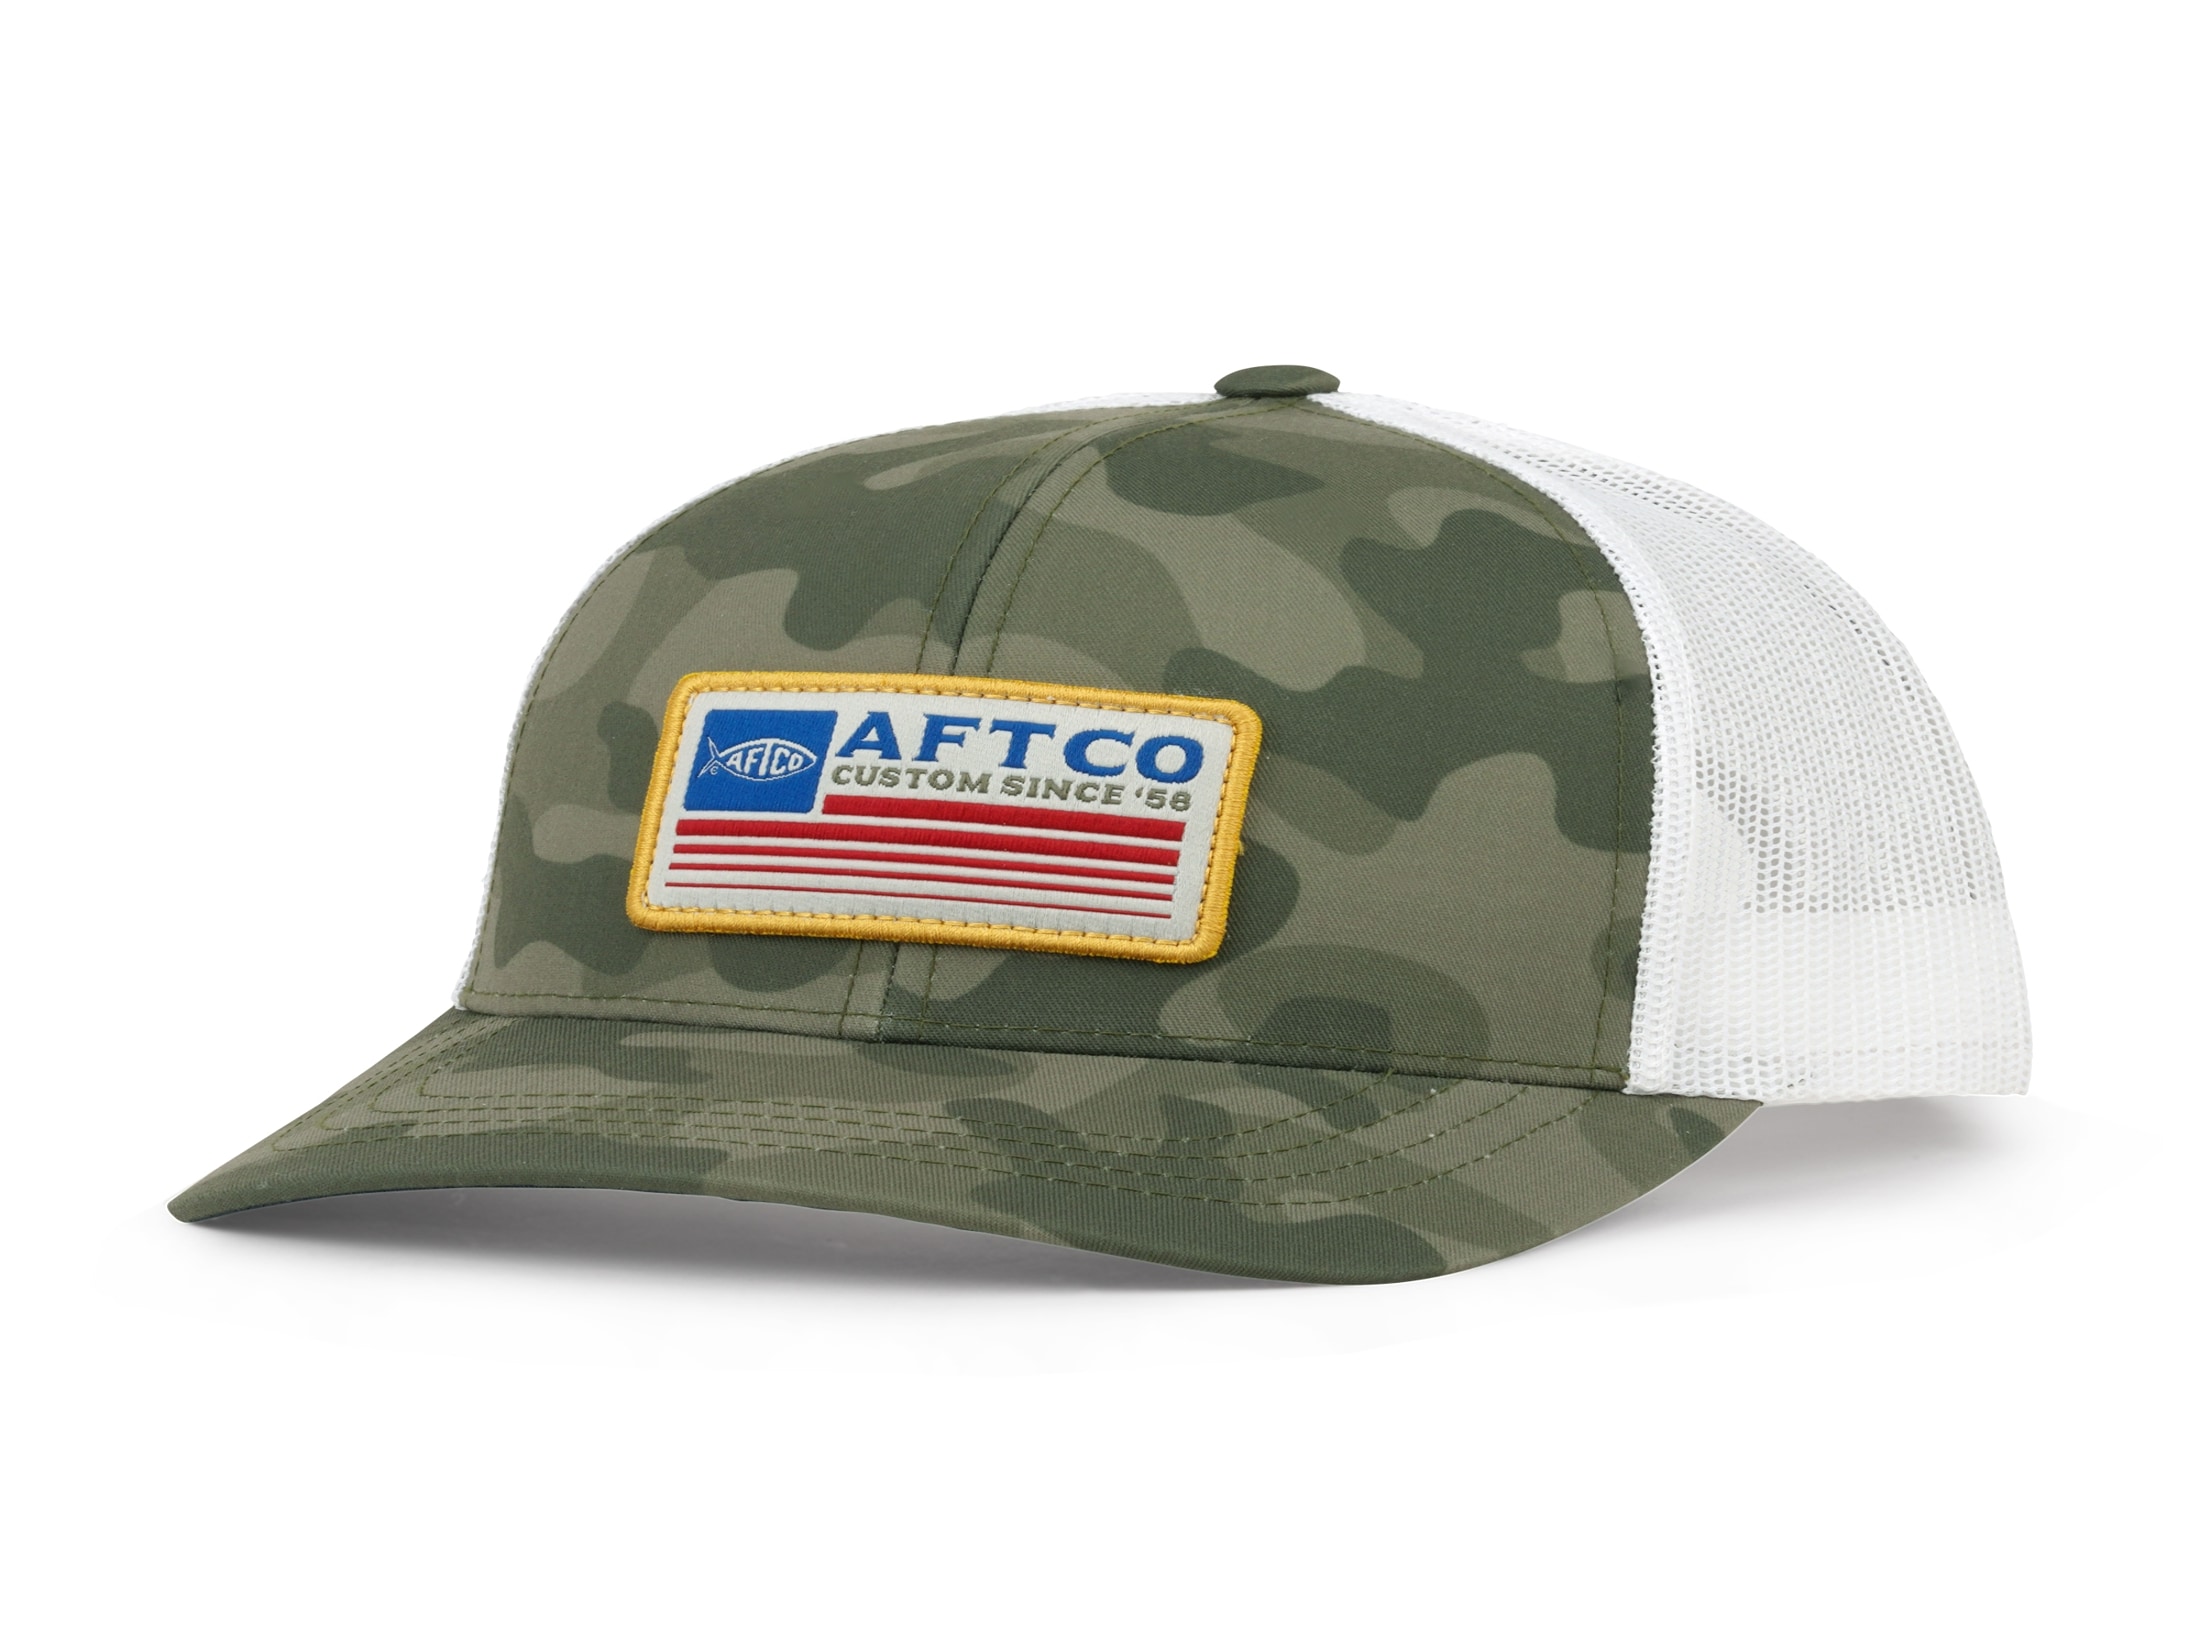 AFTCO Men's Crossbar Trucker Hat Charcoal Acid Camo One Size Fits Most